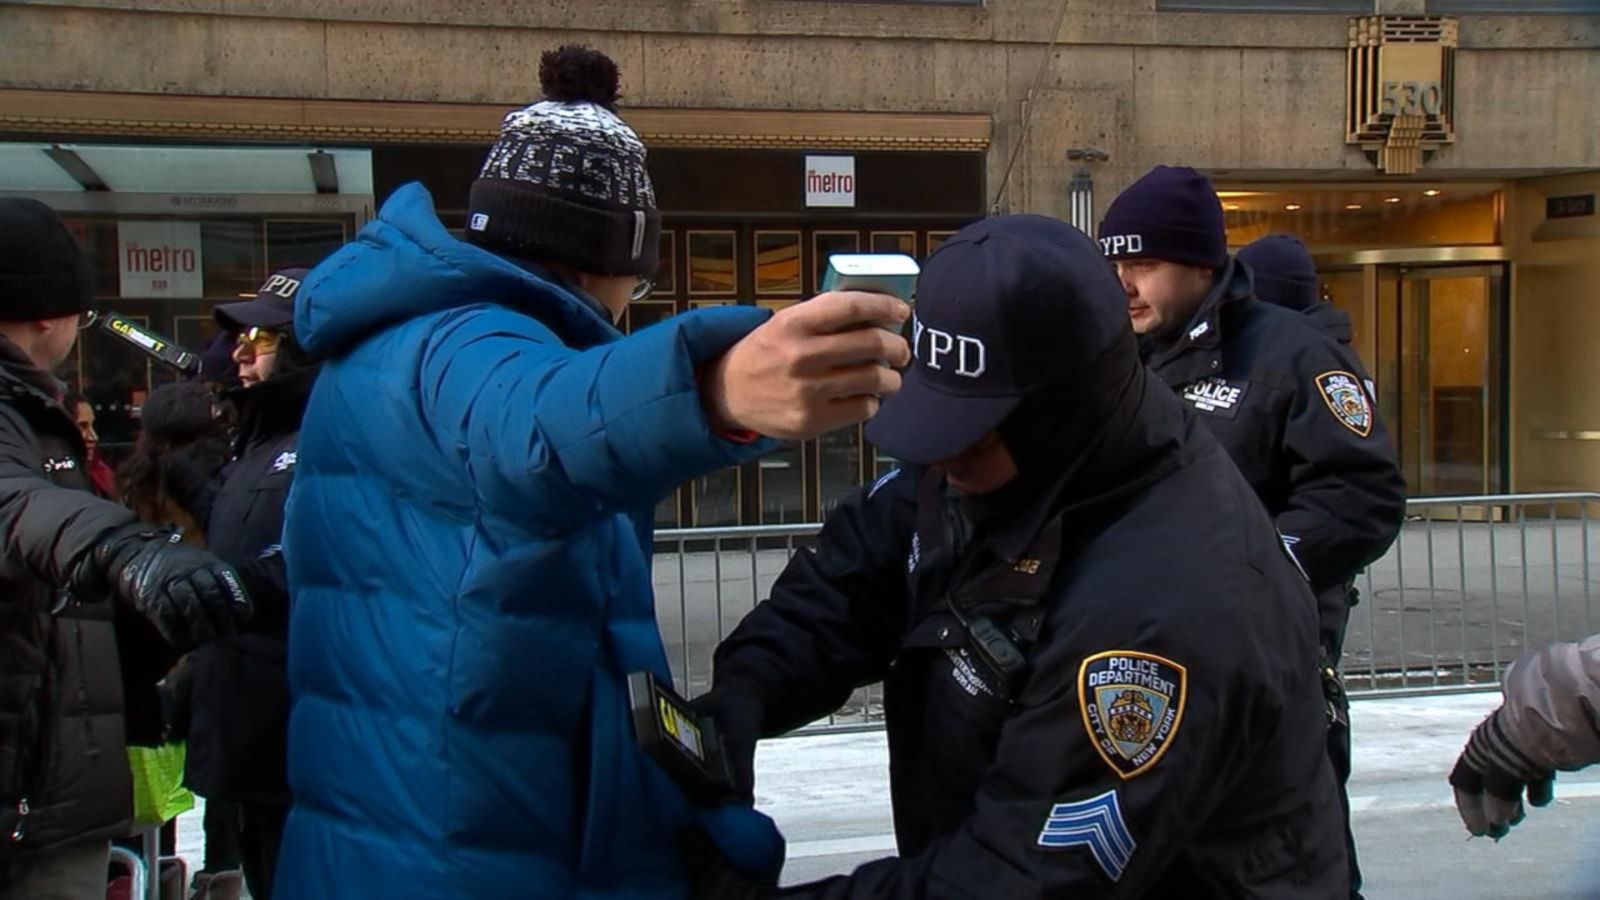 VIDEO: NYPD prepares for New Year's Eve